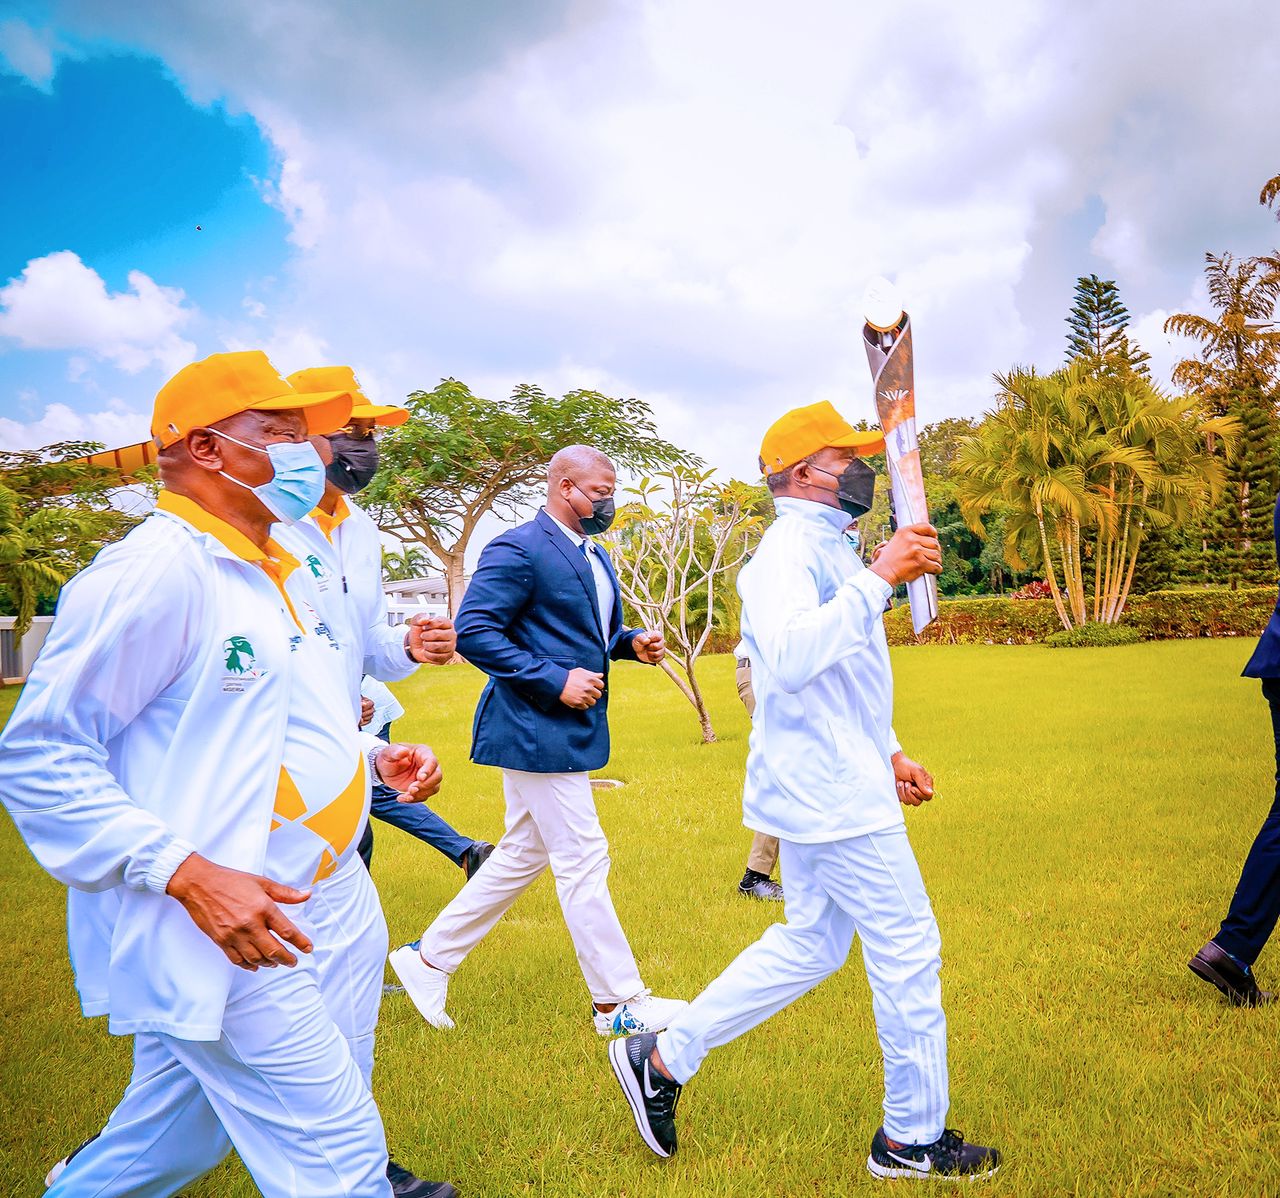 Queen’s Baton Relay Reminds Us Of Brotherhood, Friendship Among Commonwealth Members, Says Osinbajo As Nigeria Receives The Baton